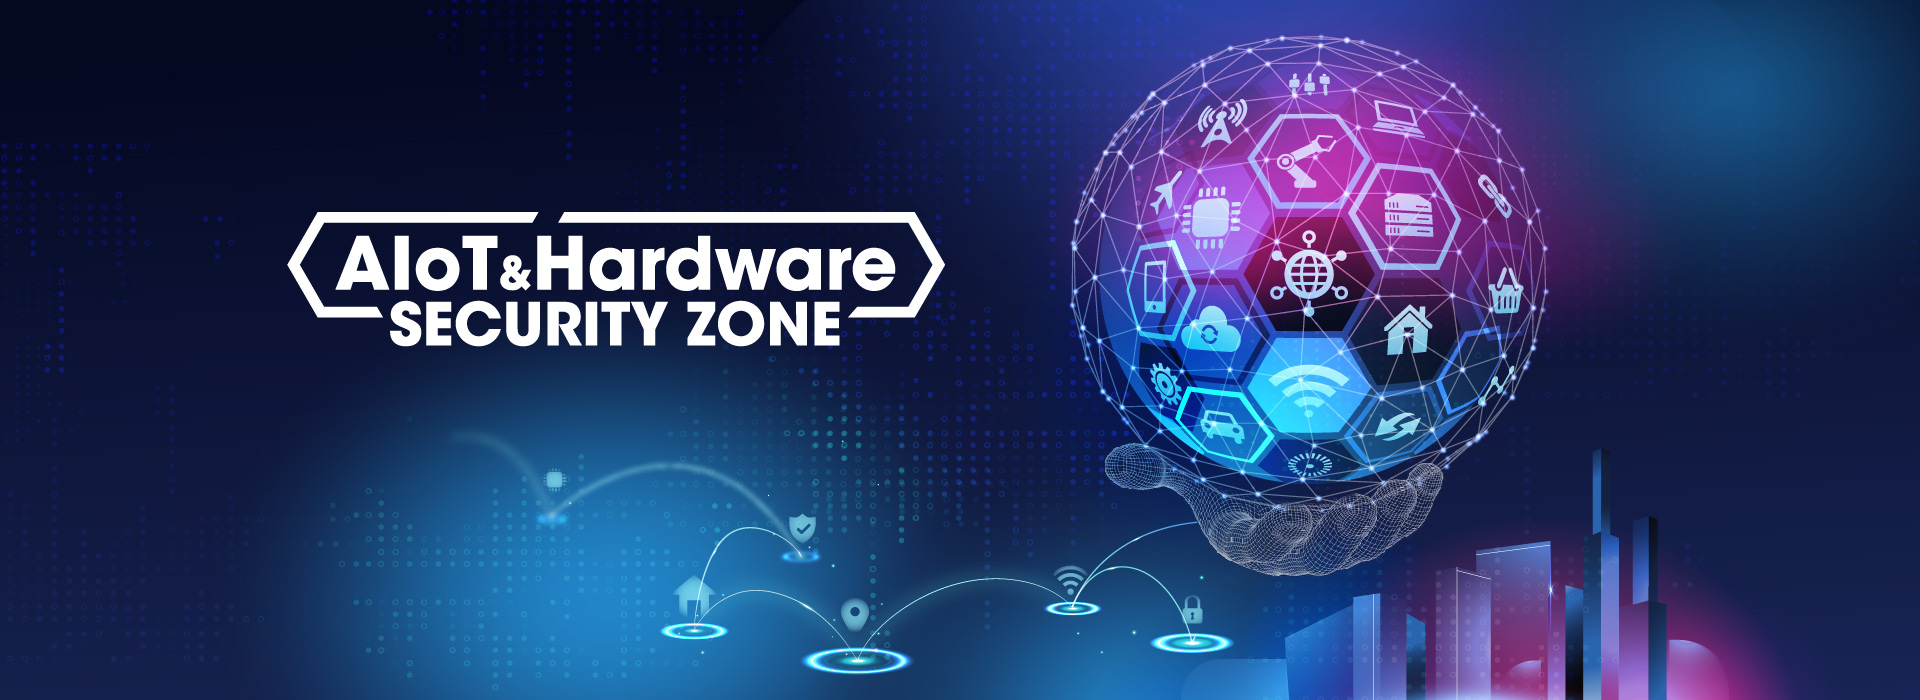 AIoT & Hardware Security Zone